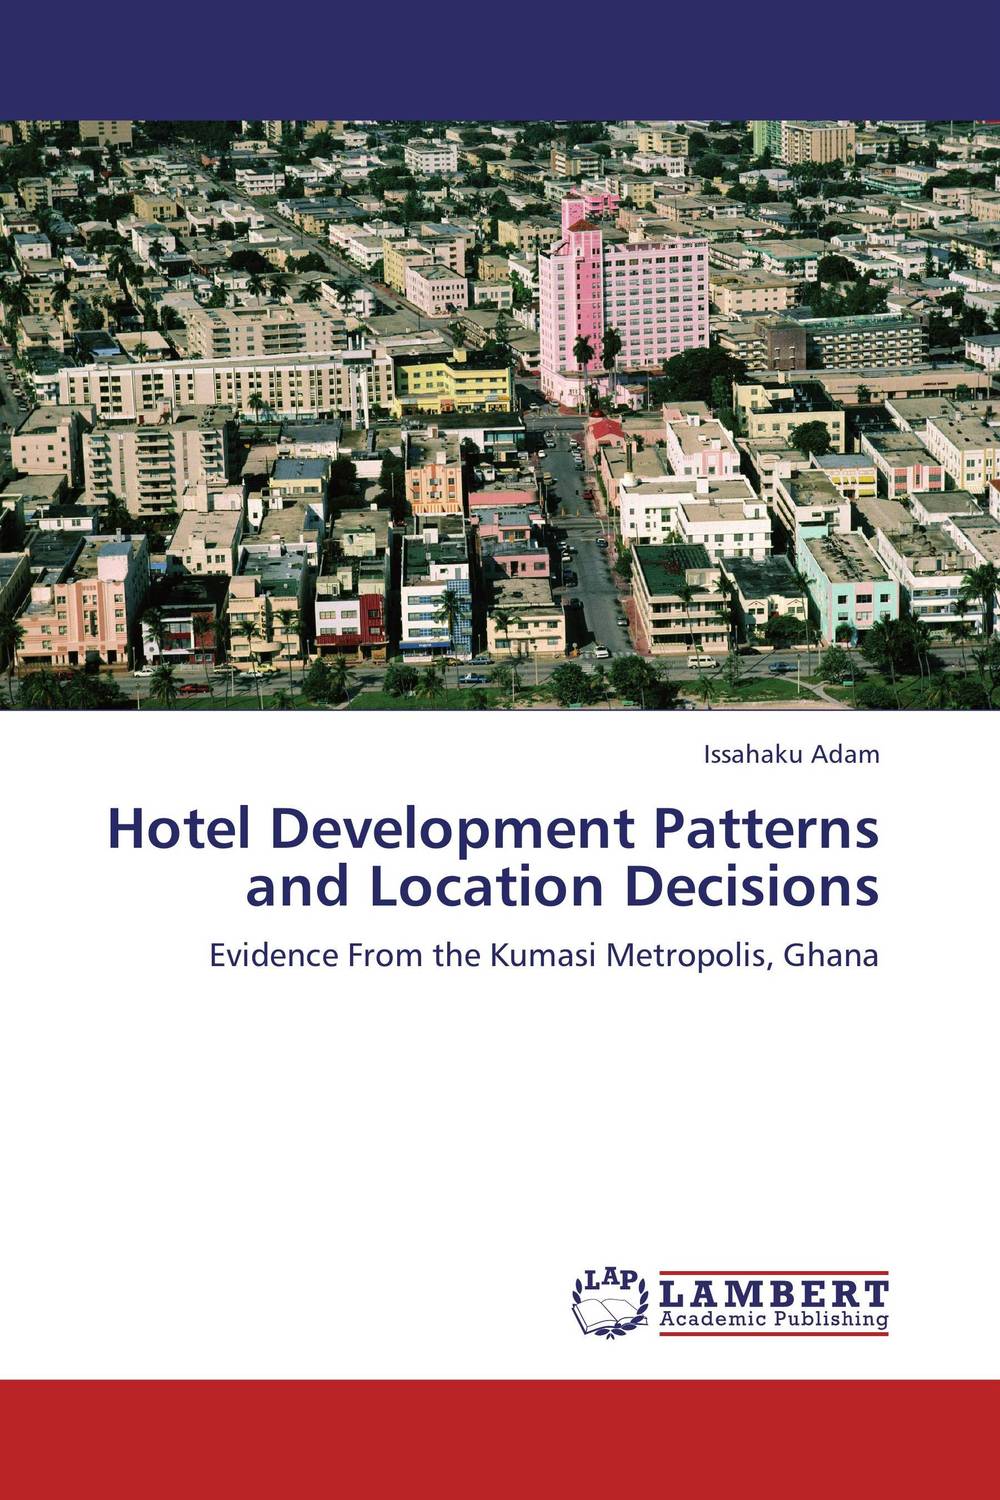 Hotel Development Patterns and Location Decisions